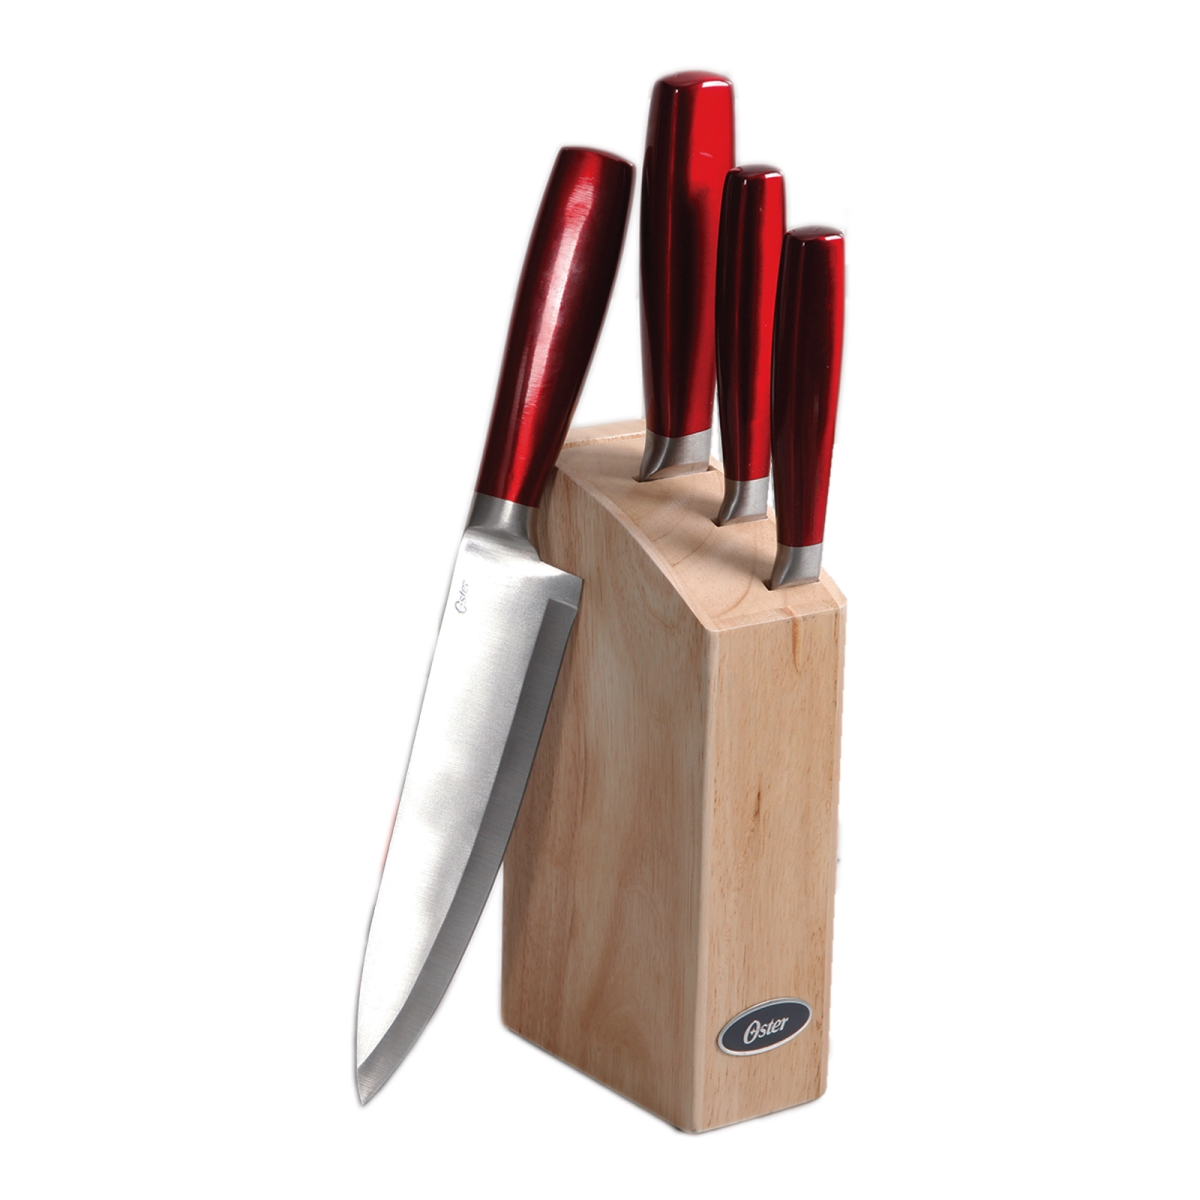 109426.05 5 Piece Calmore Cutlery Set With Rubberwood Block, Red